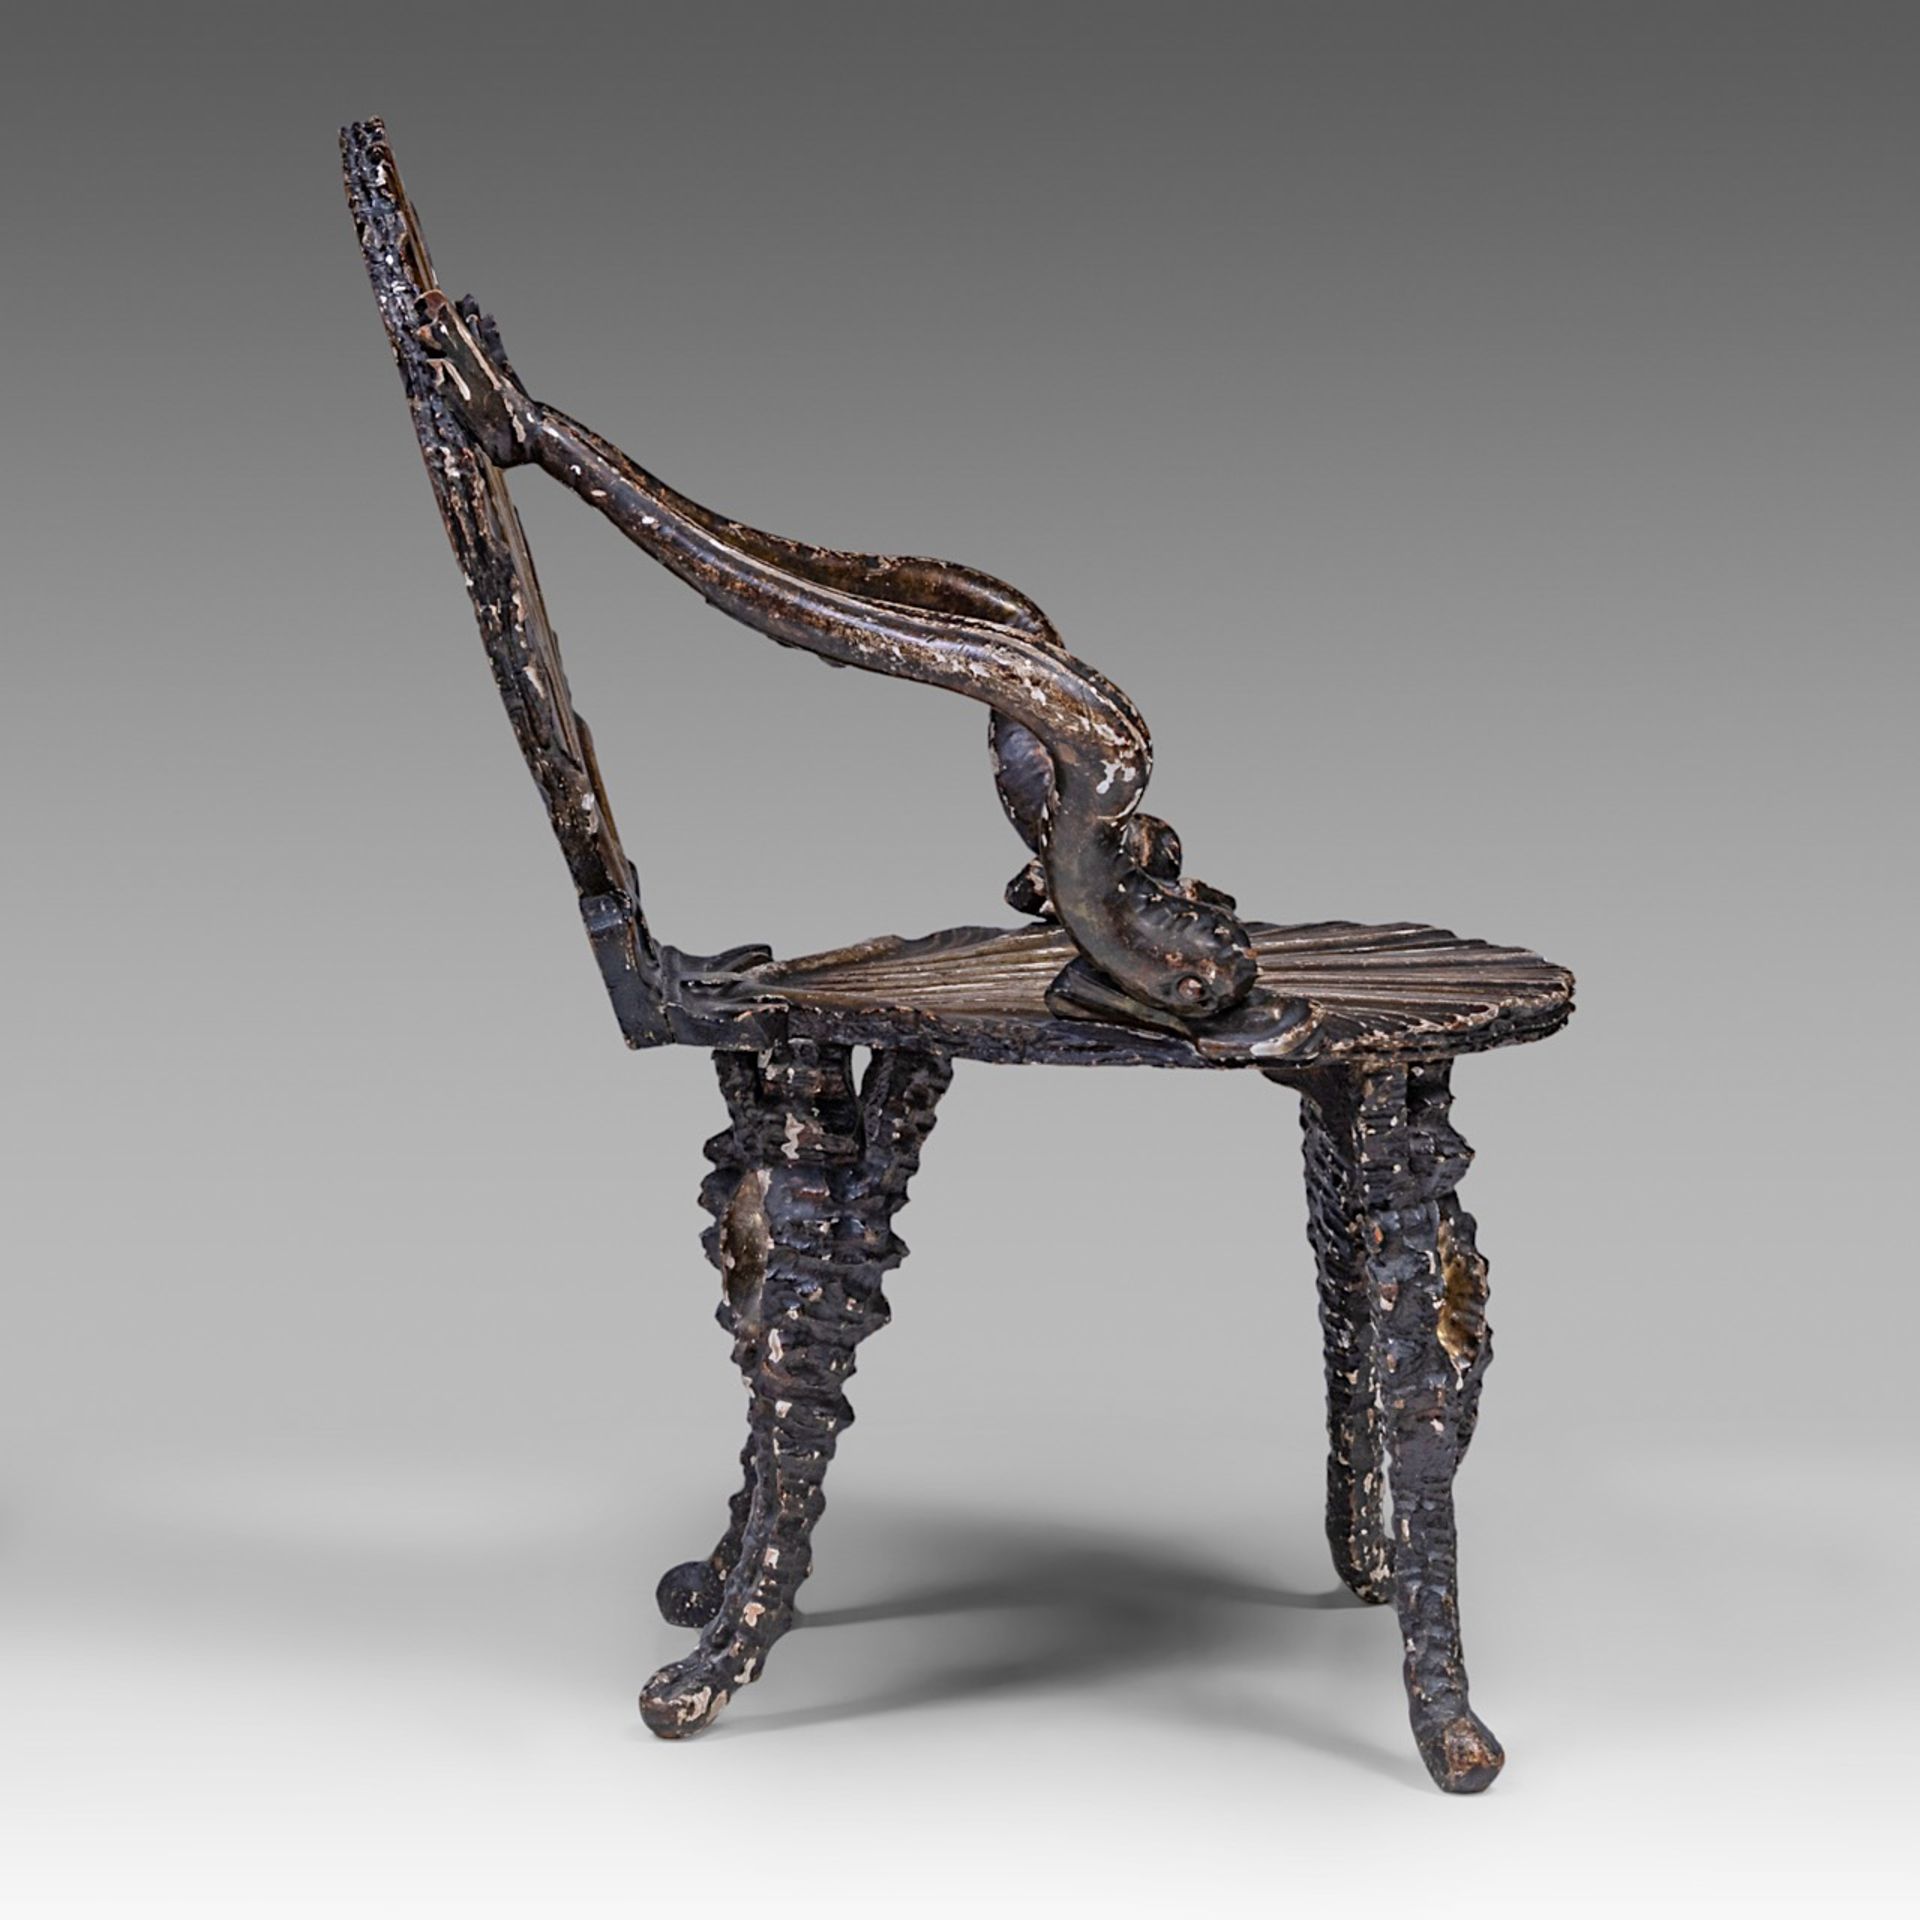 A Venetian 'Grotto' chair, patinated carved wood and stucco, 19thC, H total 84 cm - H seat 40,5 cm - - Bild 6 aus 8